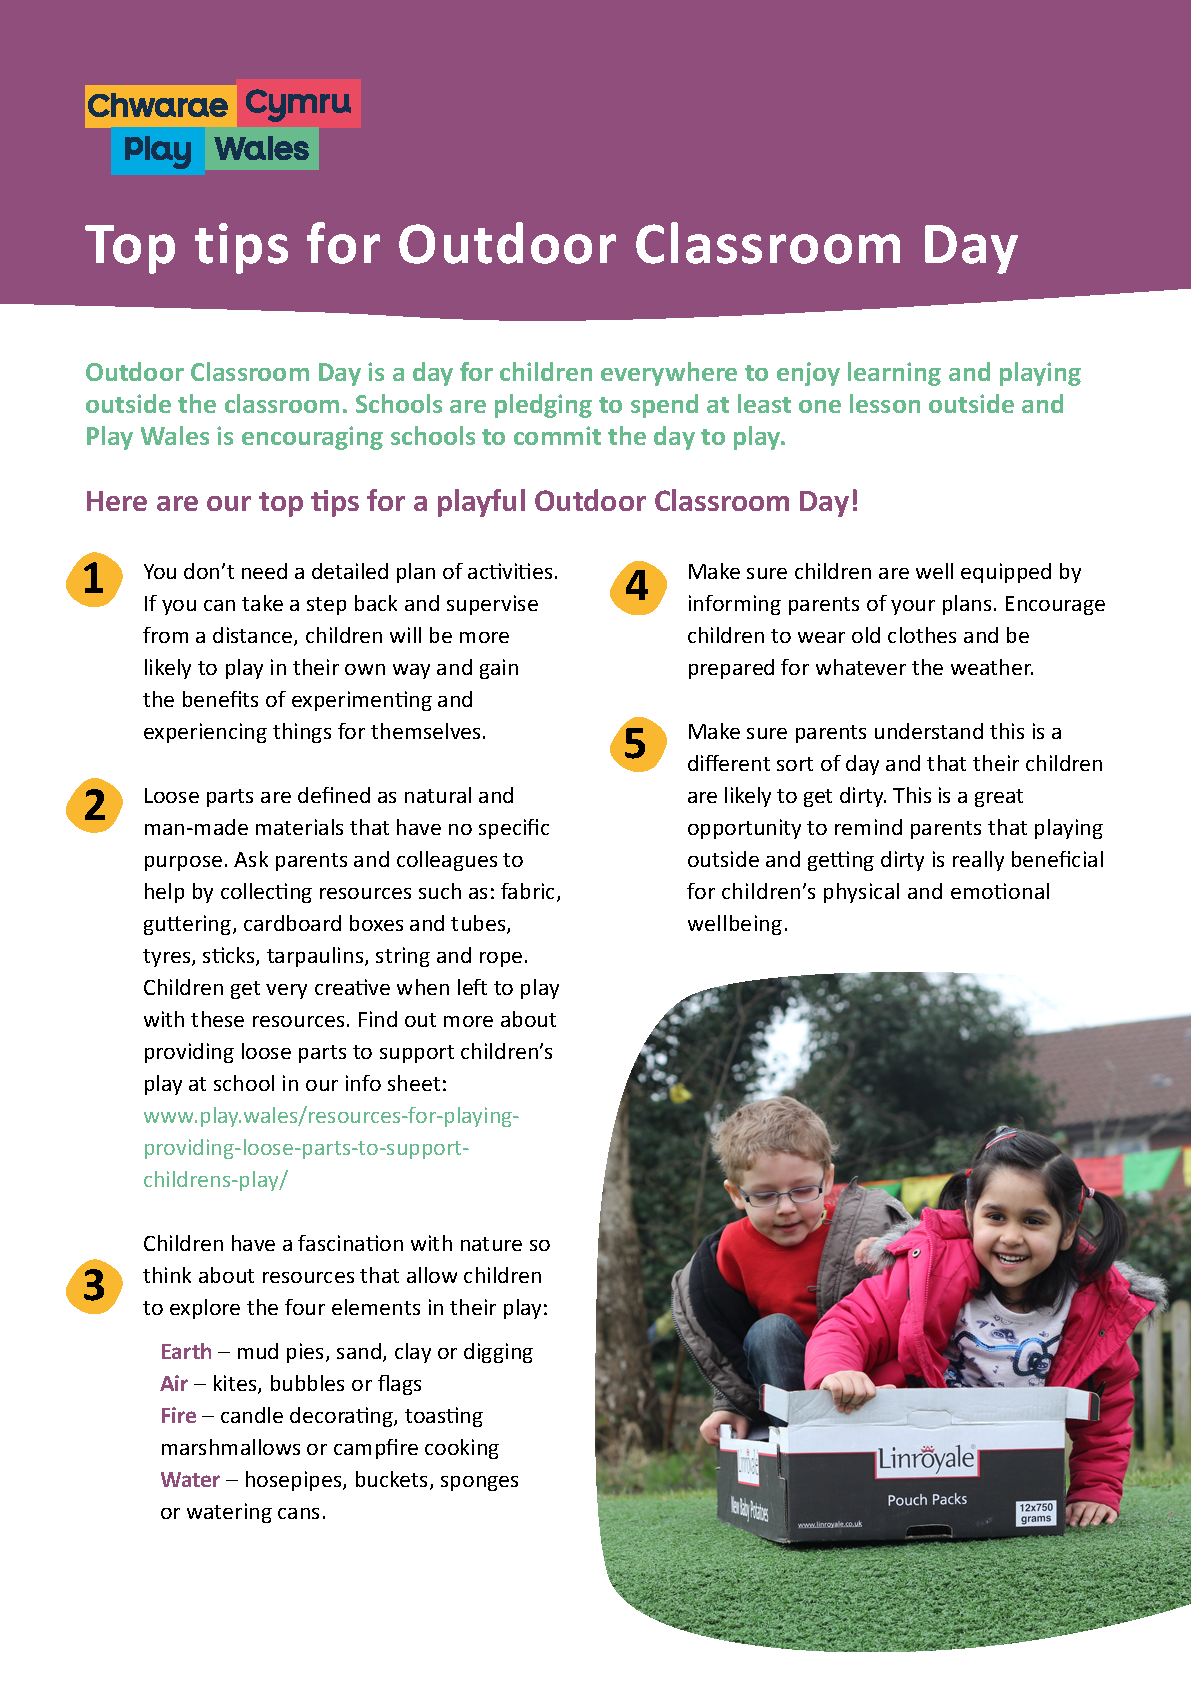 Top tips for Outdoor Classroom Day